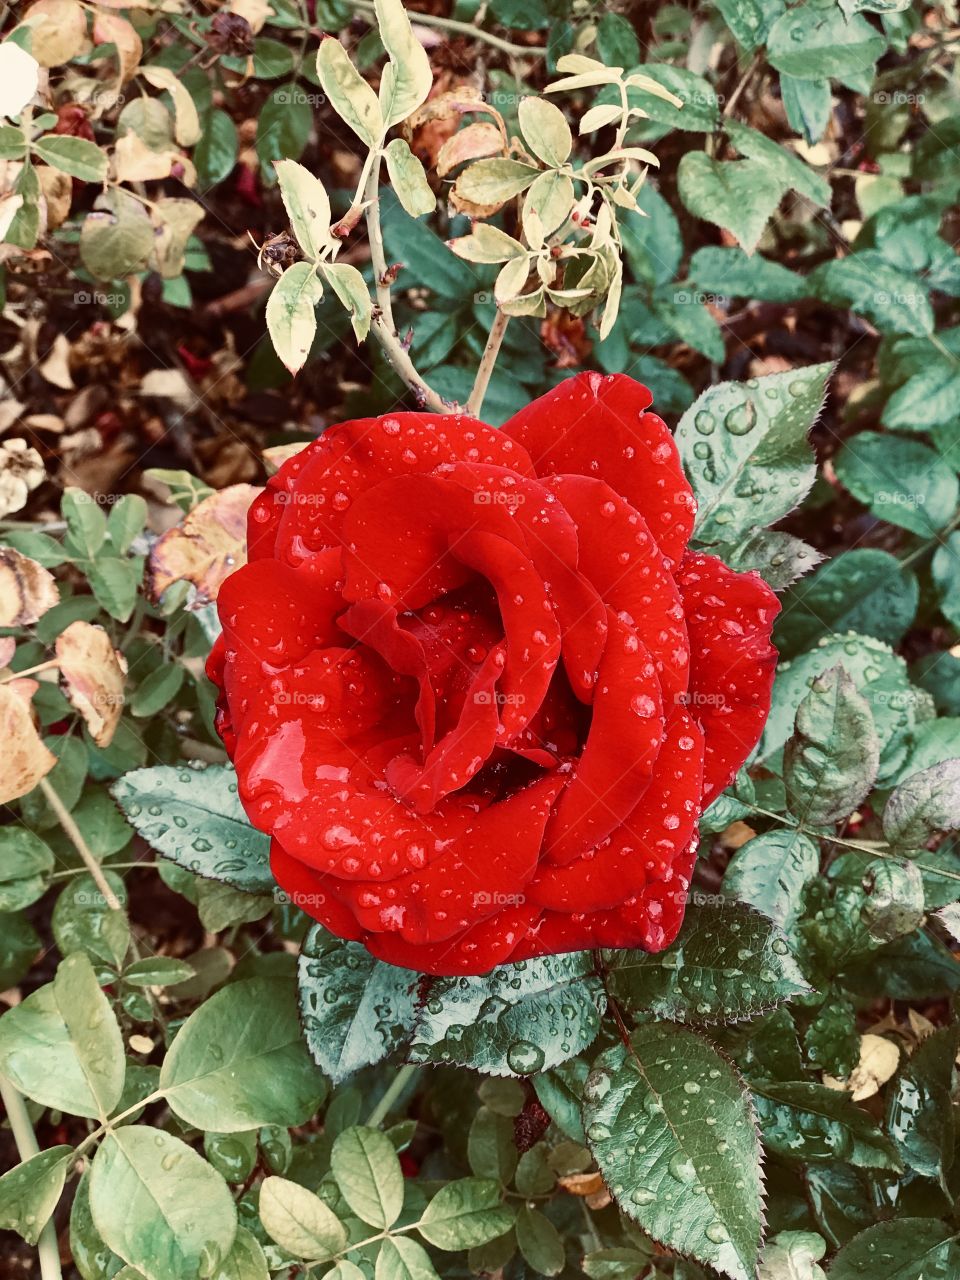 Dew drops on a red rose